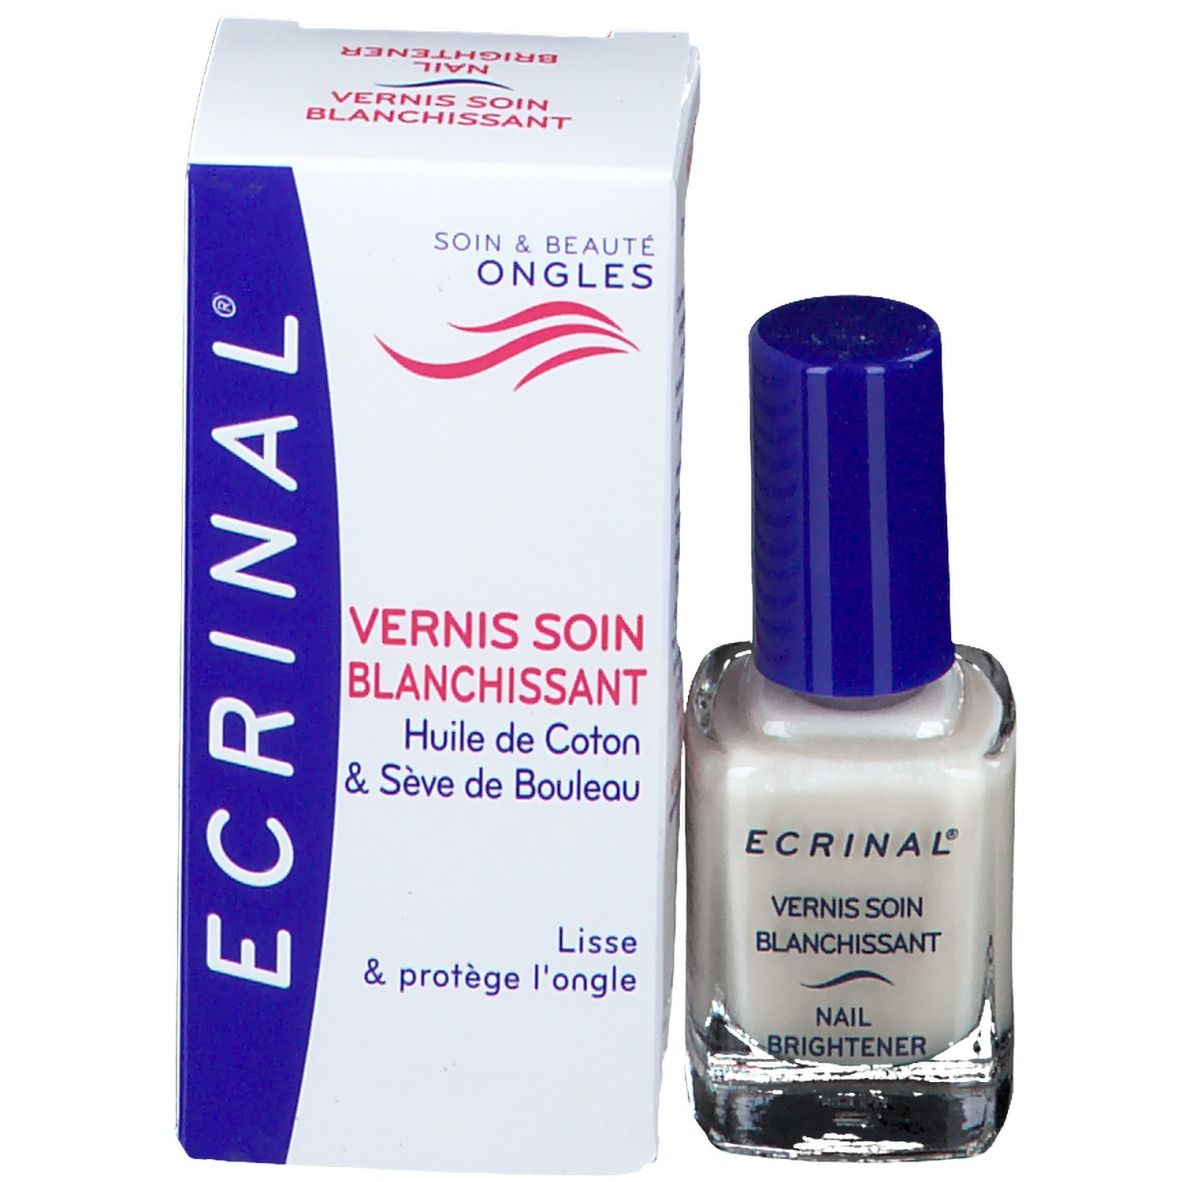 Ecrinal soin blanchissant ongles